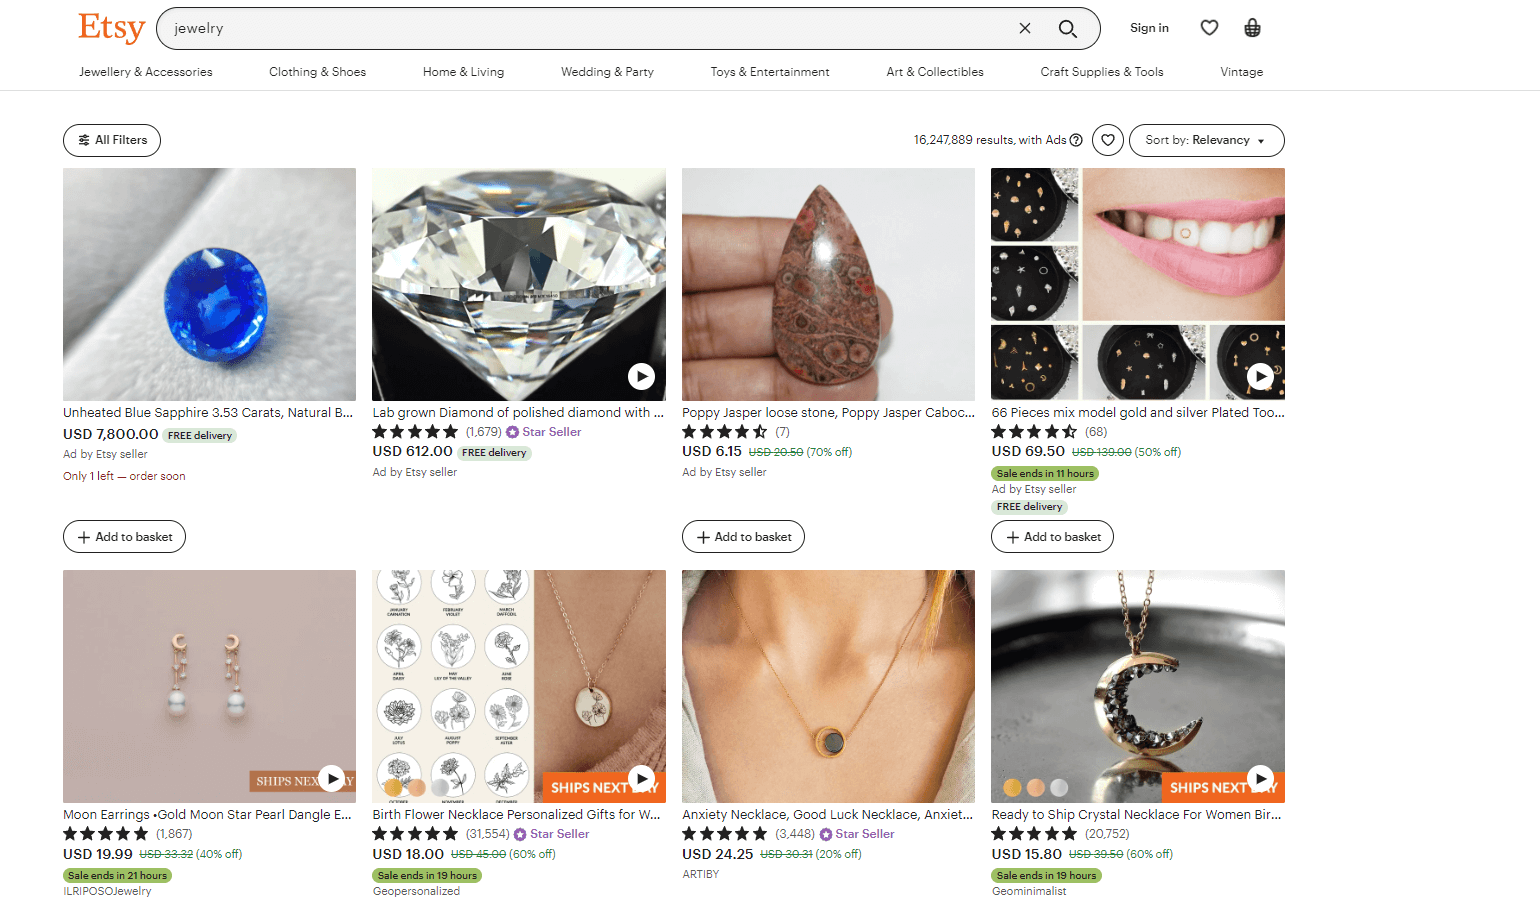 What to Sell on Etsy